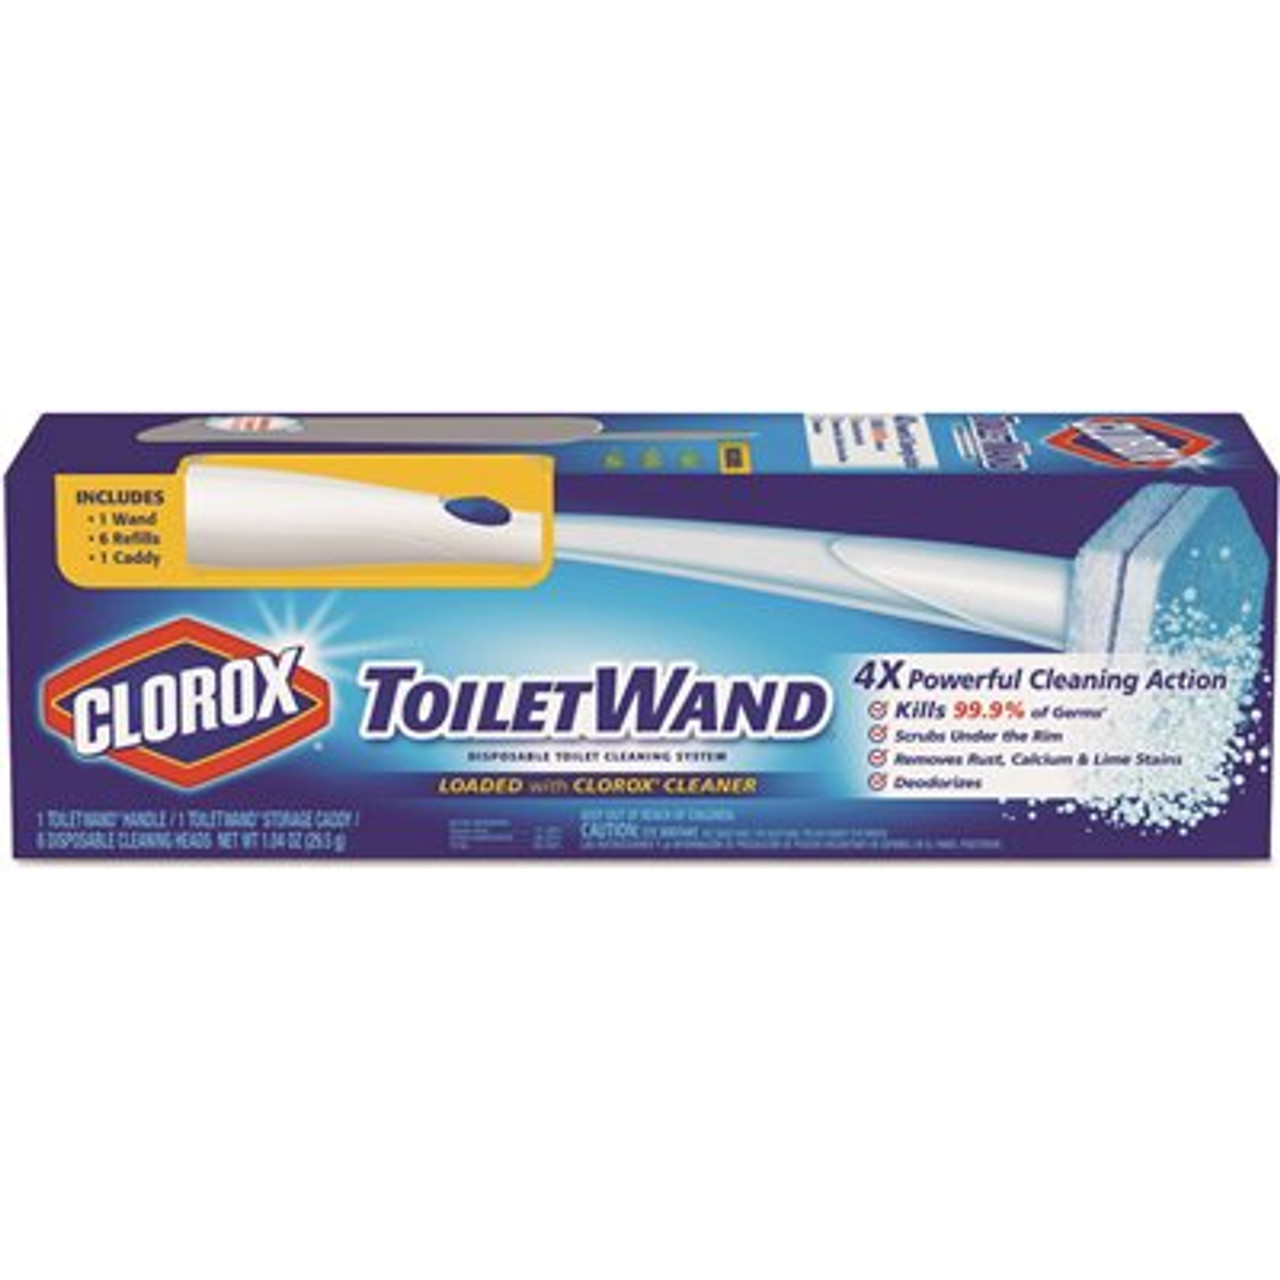 Clorox Disposable Toilet Wand Cleaning Kit, Caddy/Refills, Carton Of 6